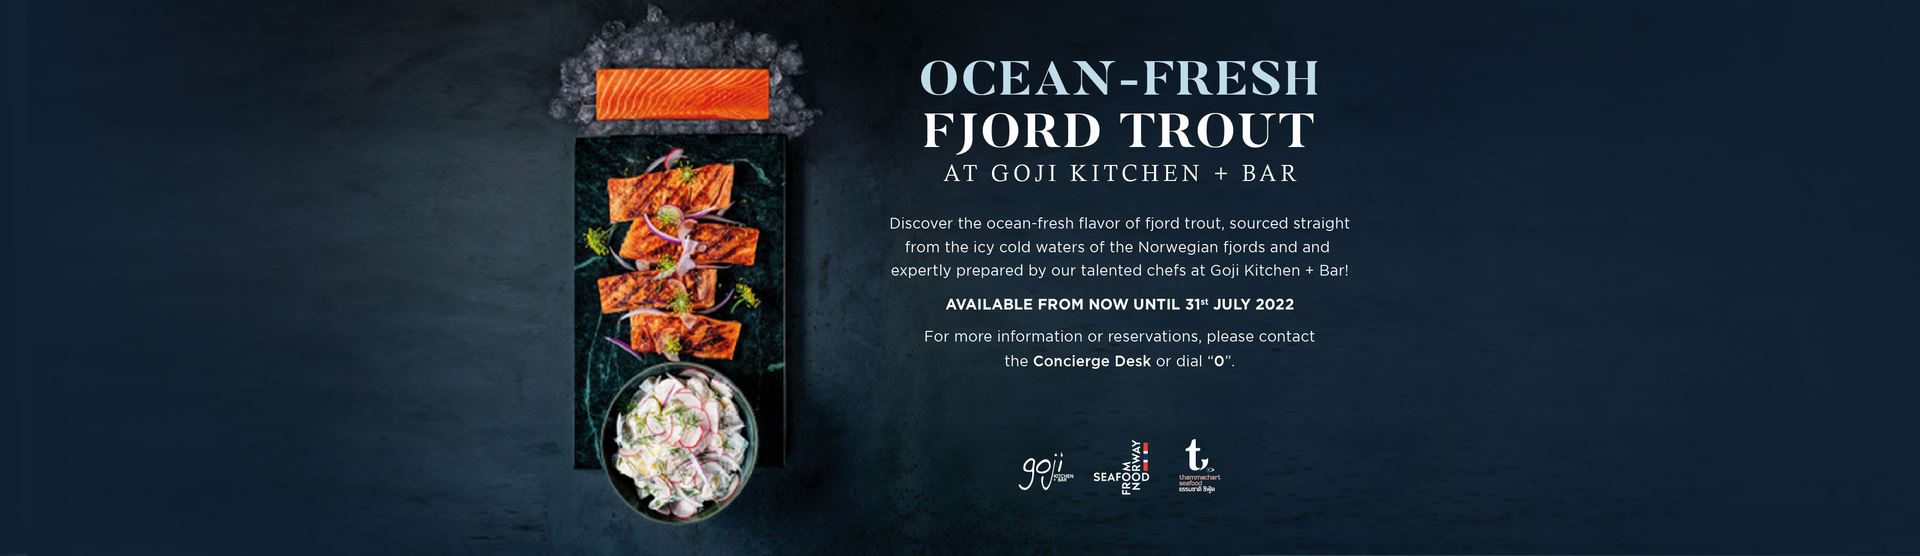 Ocean-Fresh Fjord Trout Campaign with Goji Kitchen and by Bar by Norewegian Seafood Council and Thammachart Seafood